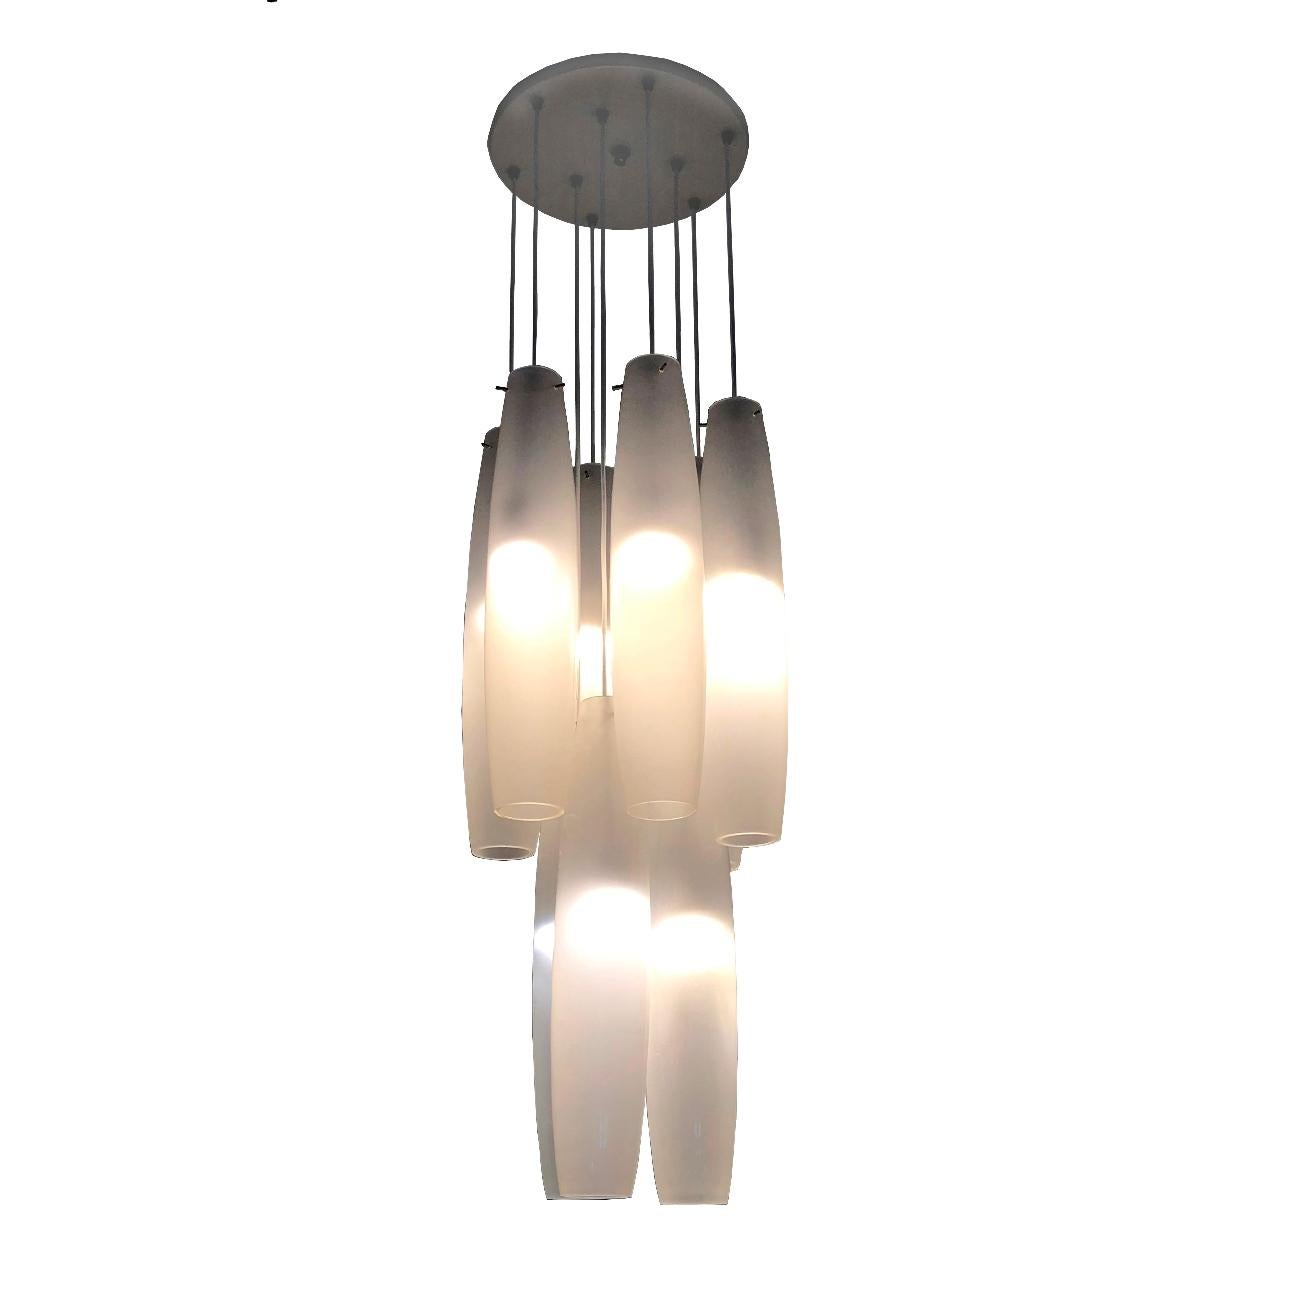 Very big chandelier consisting of 9 white pendants. Each pendant is 65 cm (25.5 in) long and 14 cm (5.5 in) in diameter.
Nine tubes are attached to a beige enameled metal ceiling rose which is fastened to the ceiling by chrome-plated nut.
The